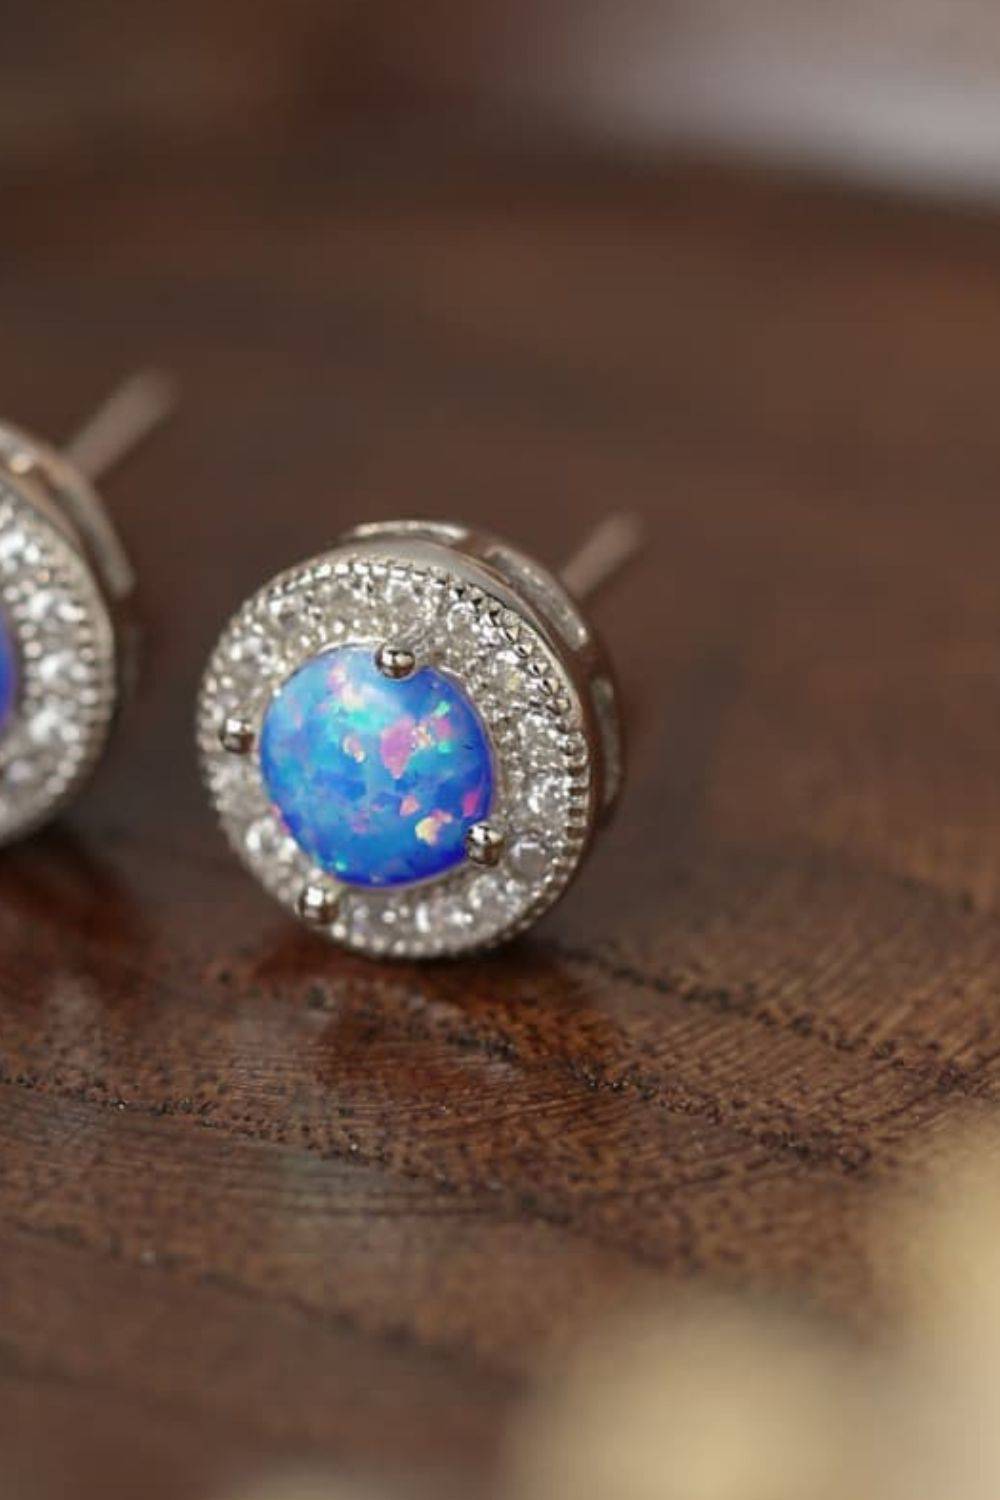 Opal Starry Nights - Ignite Your Passion with Mesmerizing Australian Opals - Lightweight and Comfortable Earrings that Complement Any Outfit. - Guy Christopher